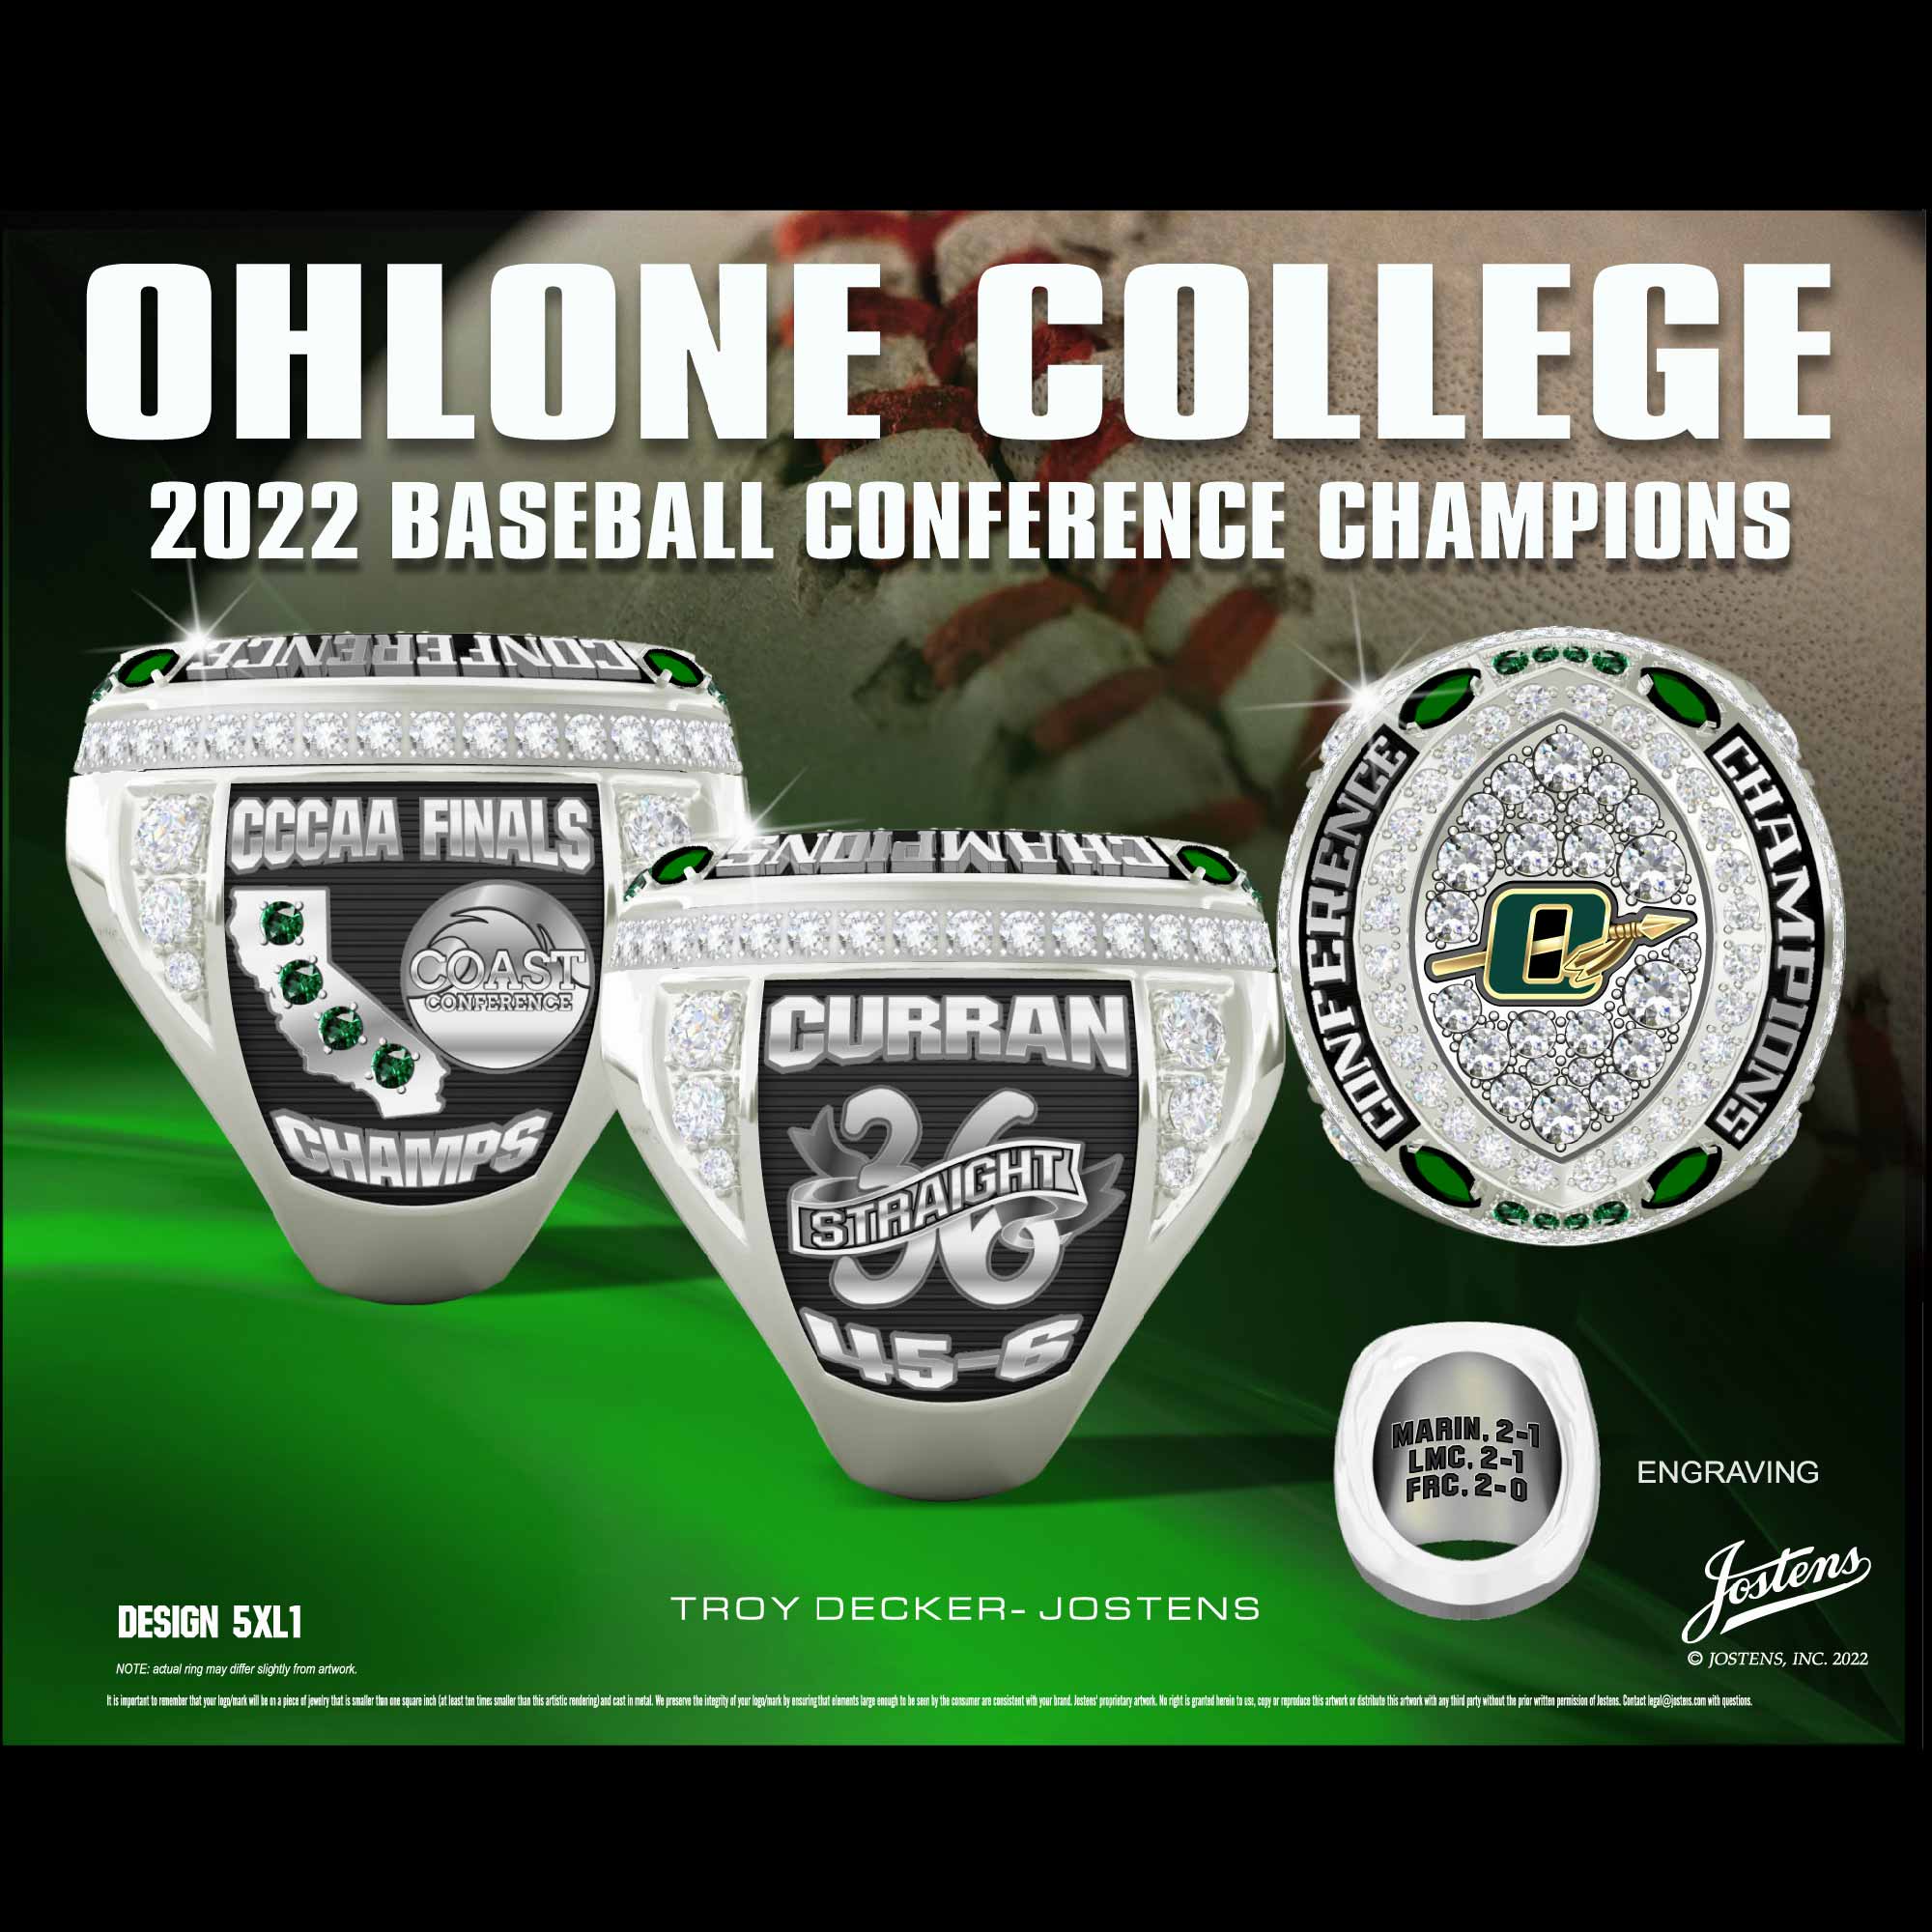 Ohlone College Baseball 2022 Conference Championship Ring